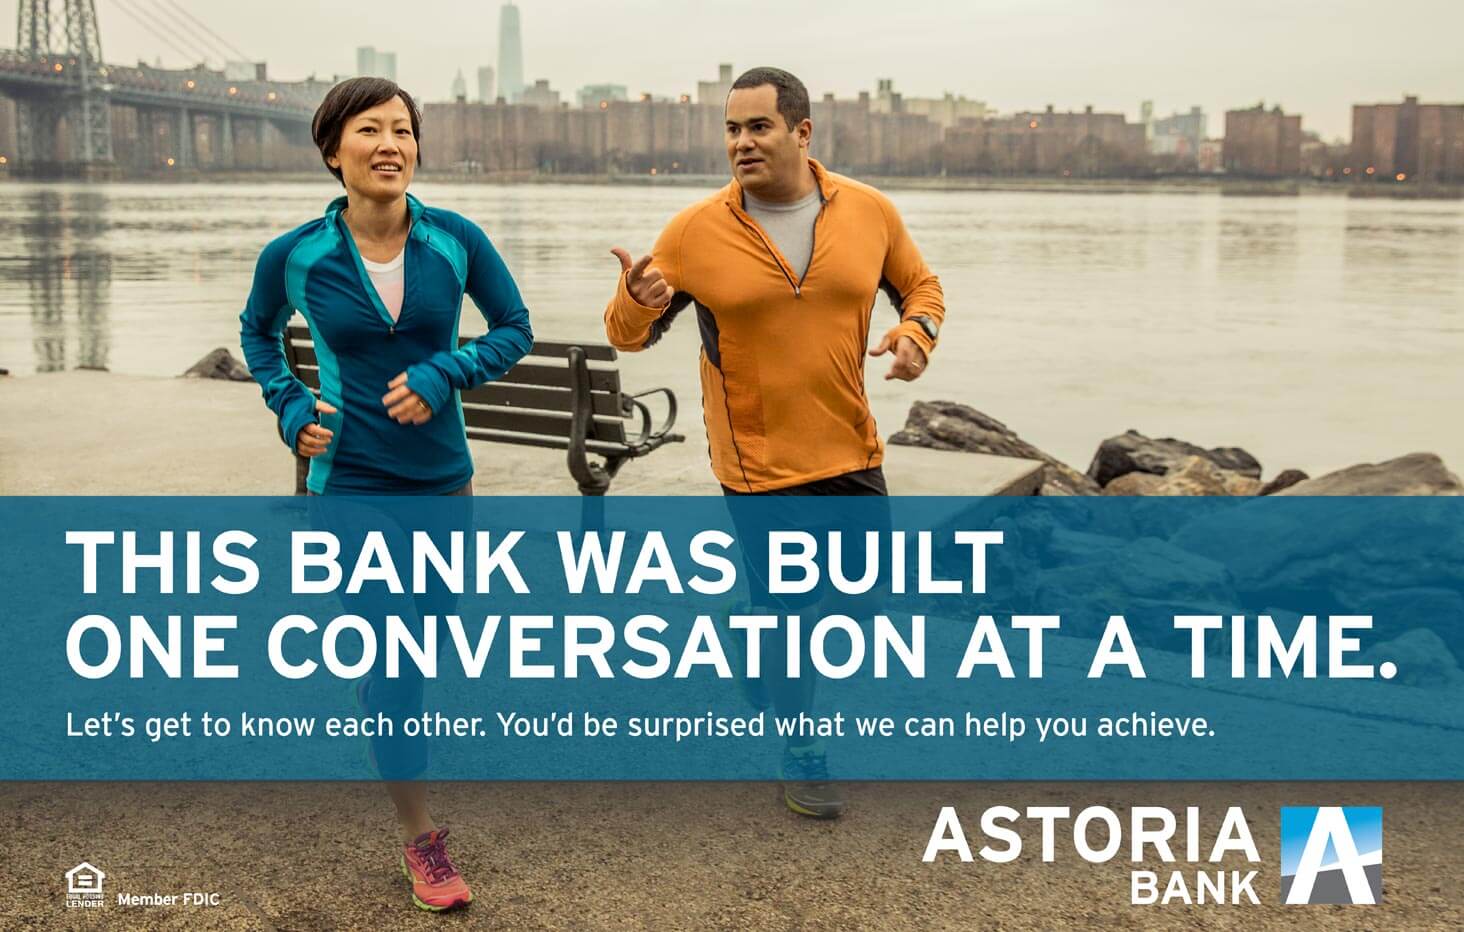 Astoria Bank. Our bank was built one conversation at a time.